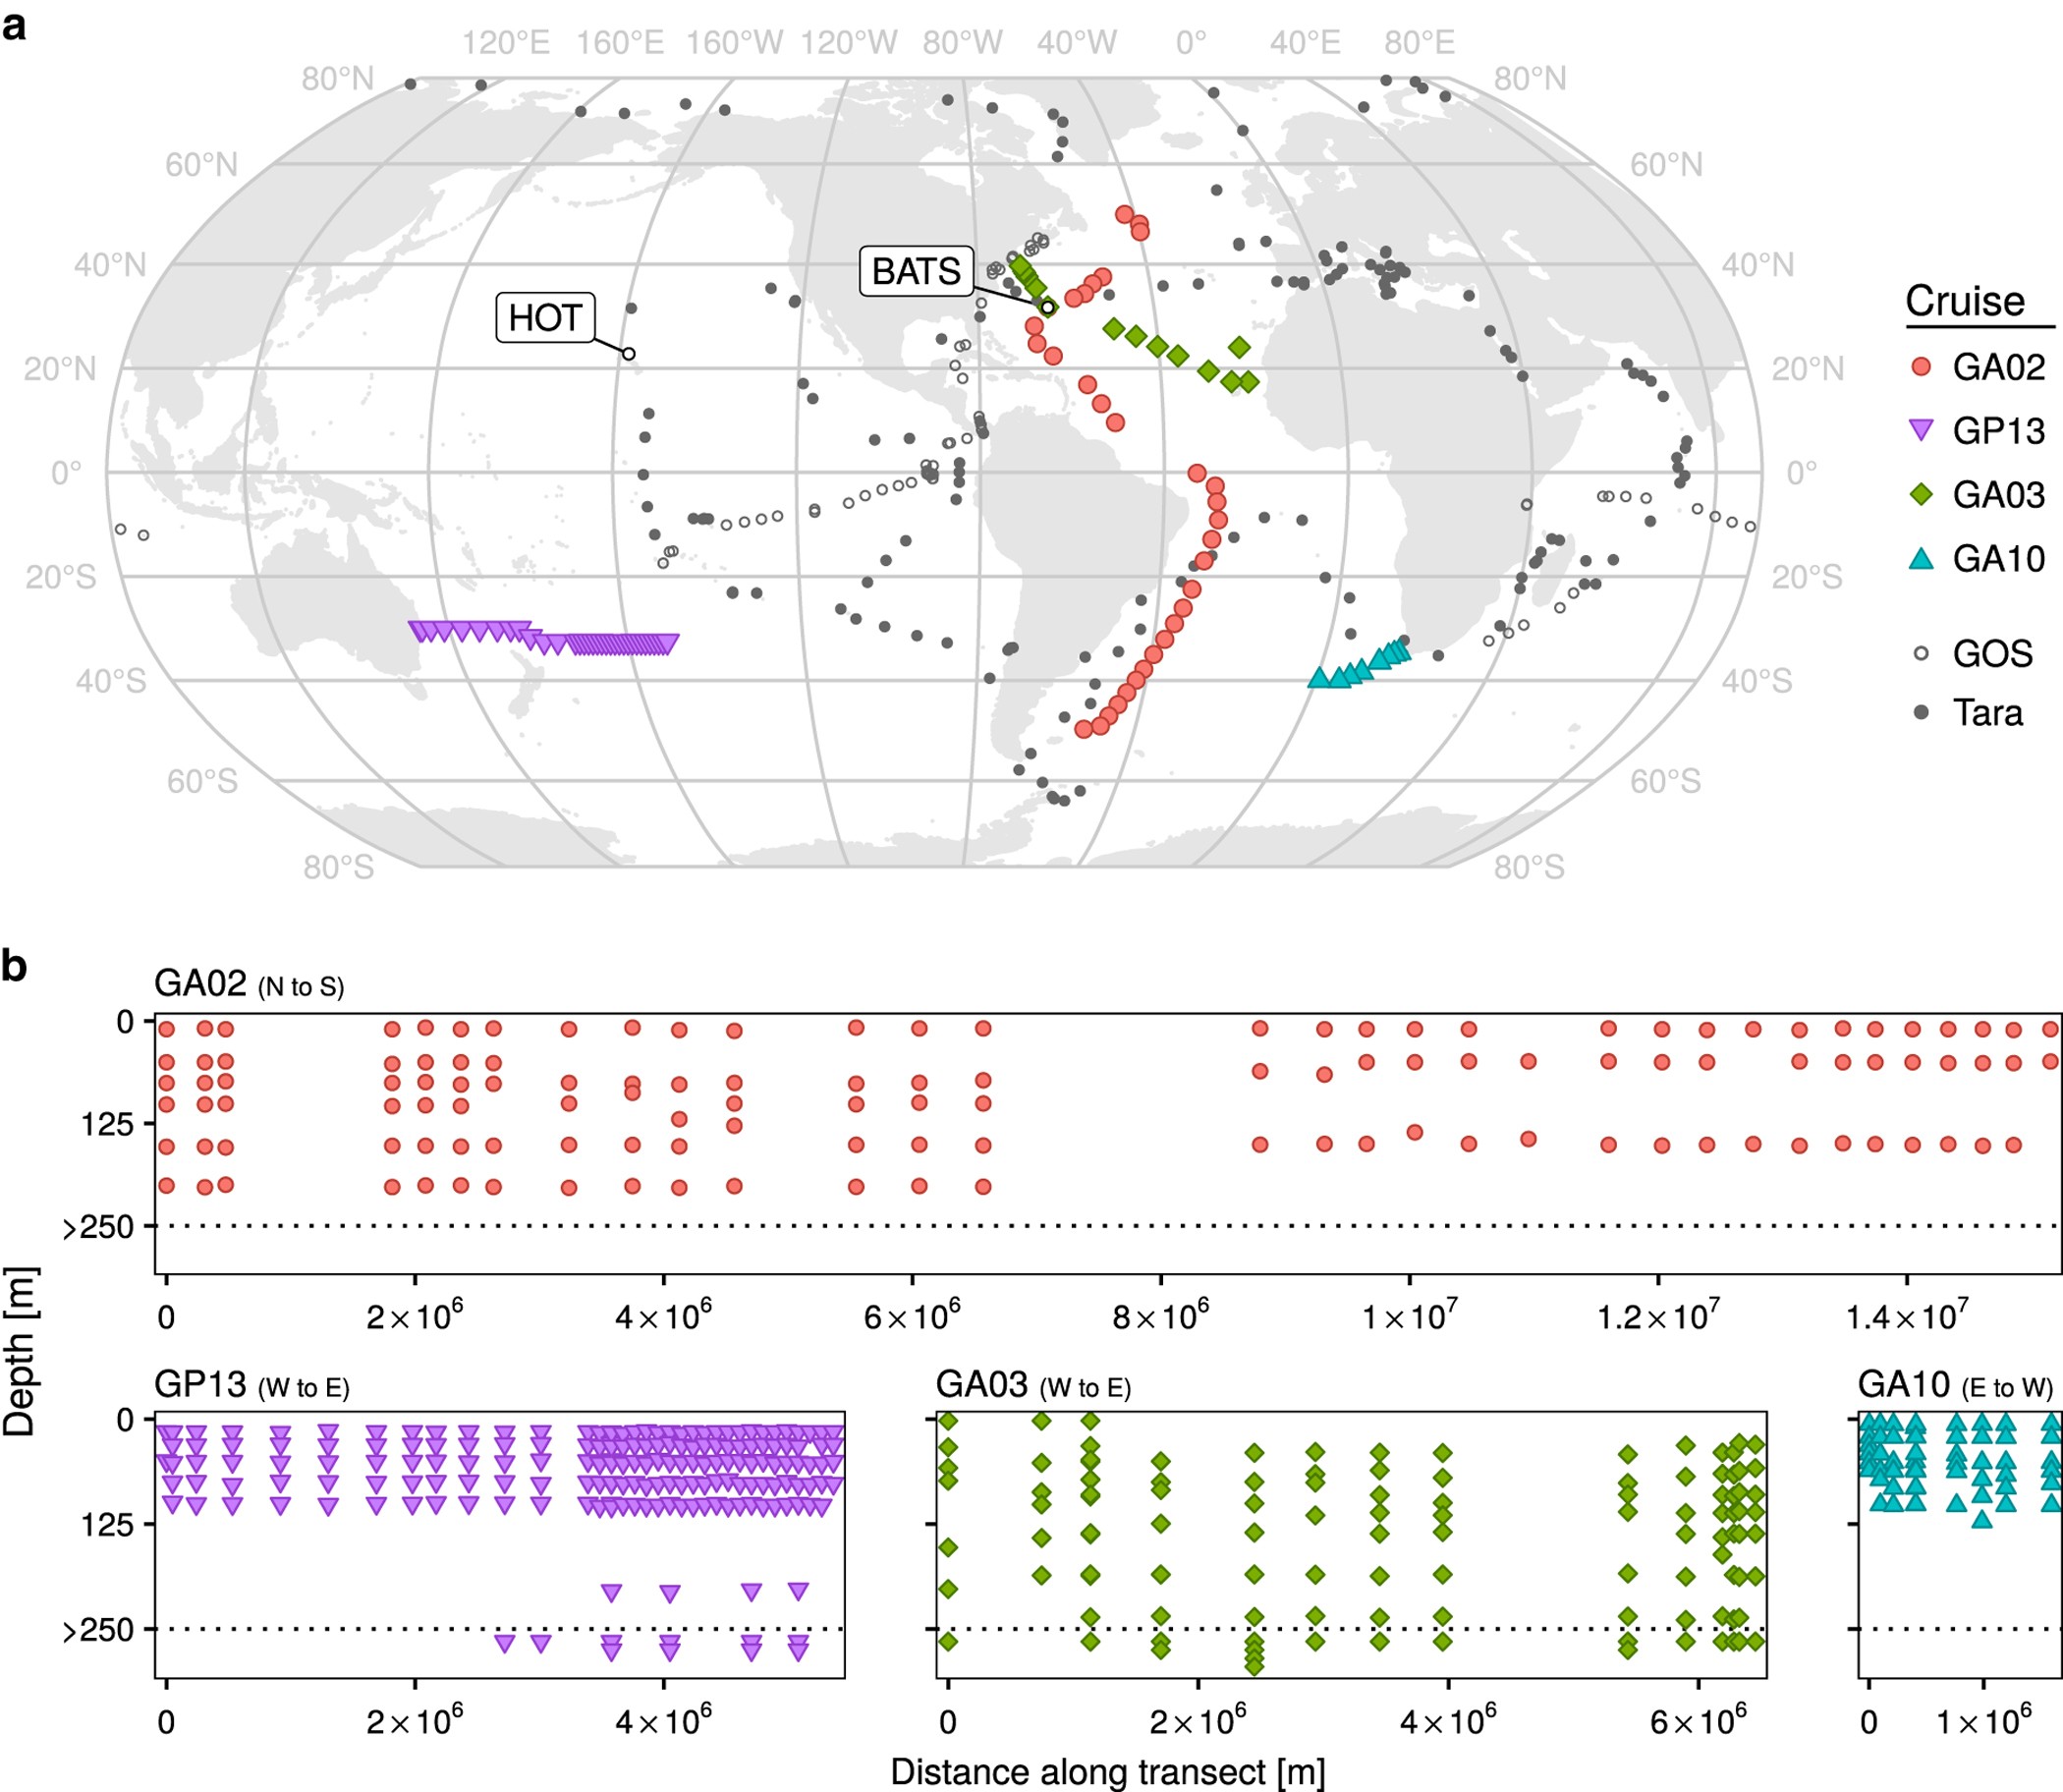 Marine microbial metagenomes sampled across space and time | Scientific Data